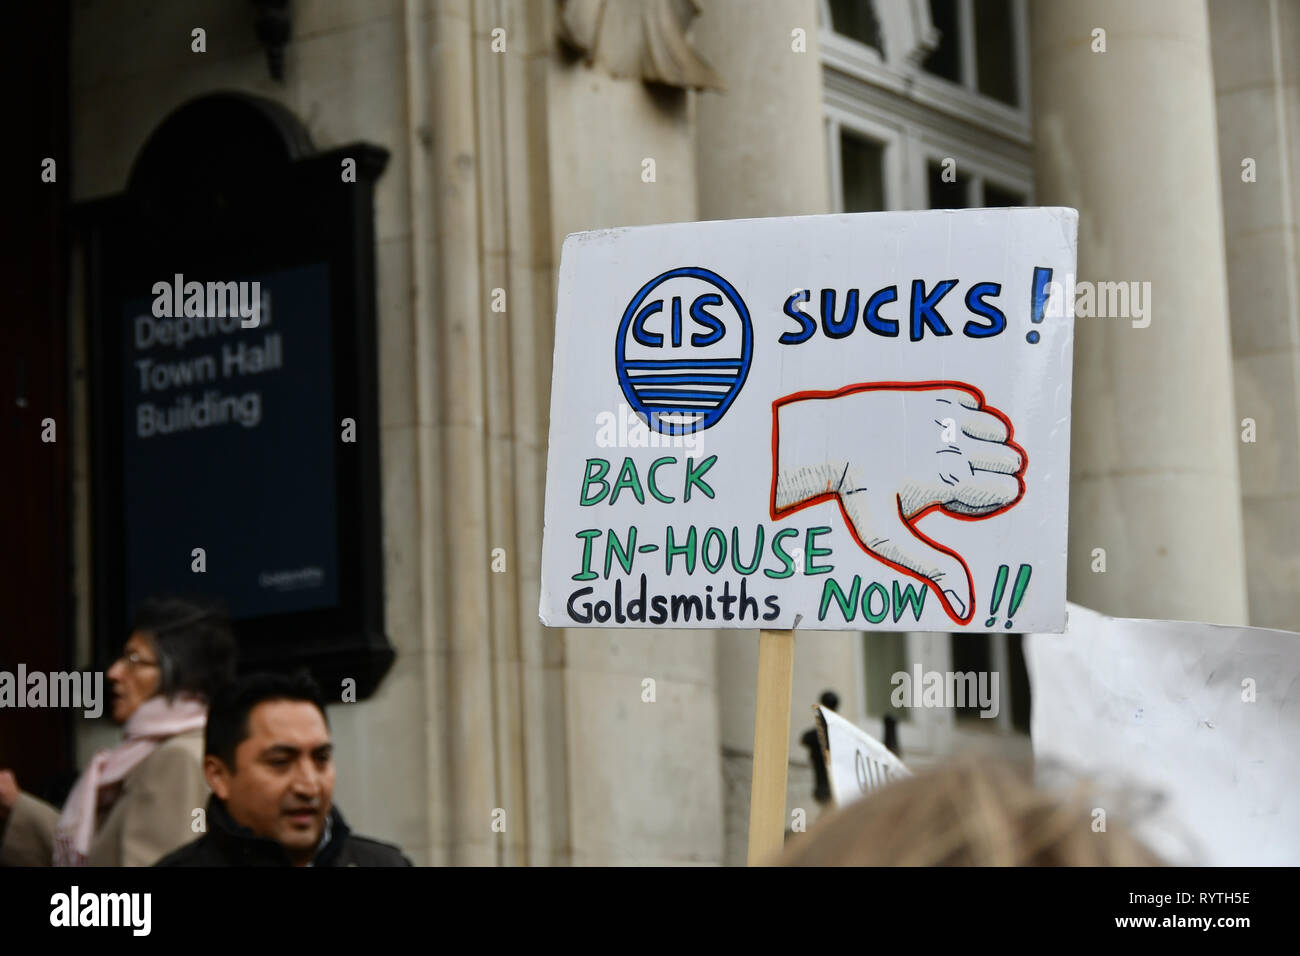 London, UK. 15th Mar 2019. Protesters of Goldsmiths Anti-Racist Action take action occupied Deptford Town Hall building, Education Officer Hamna Imran was attacked at election week, faced racist abuse— with graffiti mocking her accent and her banner being stripped down. Shame on the UK demon-cracy racism year in year oppresses of all minority. Credit: Picture Capital/Alamy Live News Stock Photo